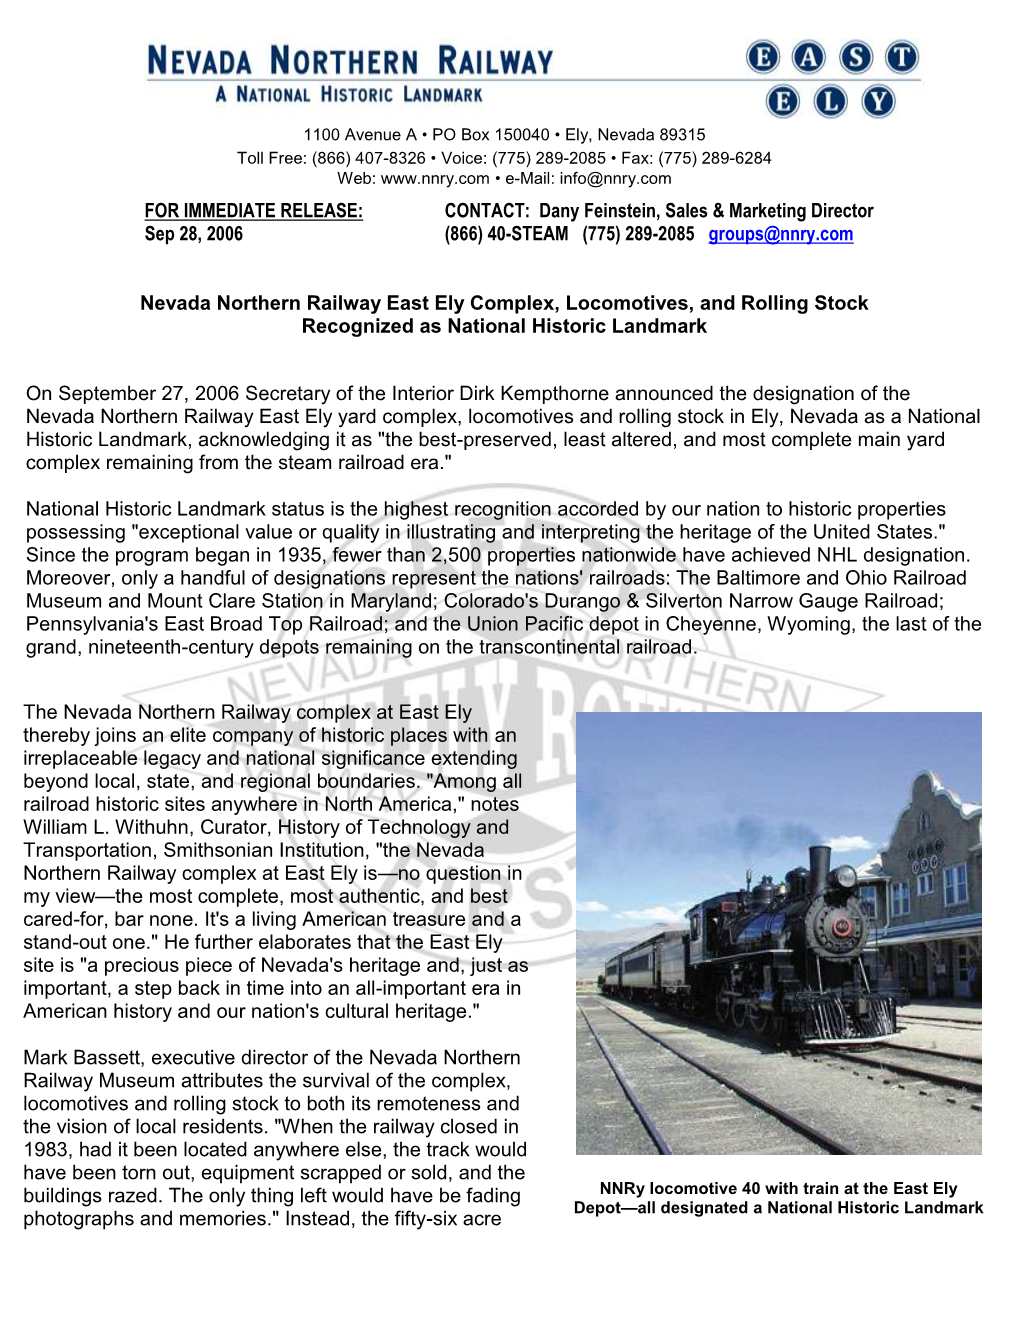 FOR IMMEDIATE RELEASE: CONTACT: Dany Feinstein, Sales & Marketing Director Sep 28, 2006 (866) 40-STEAM (775) 289-2085 Groups@Nnry.Com